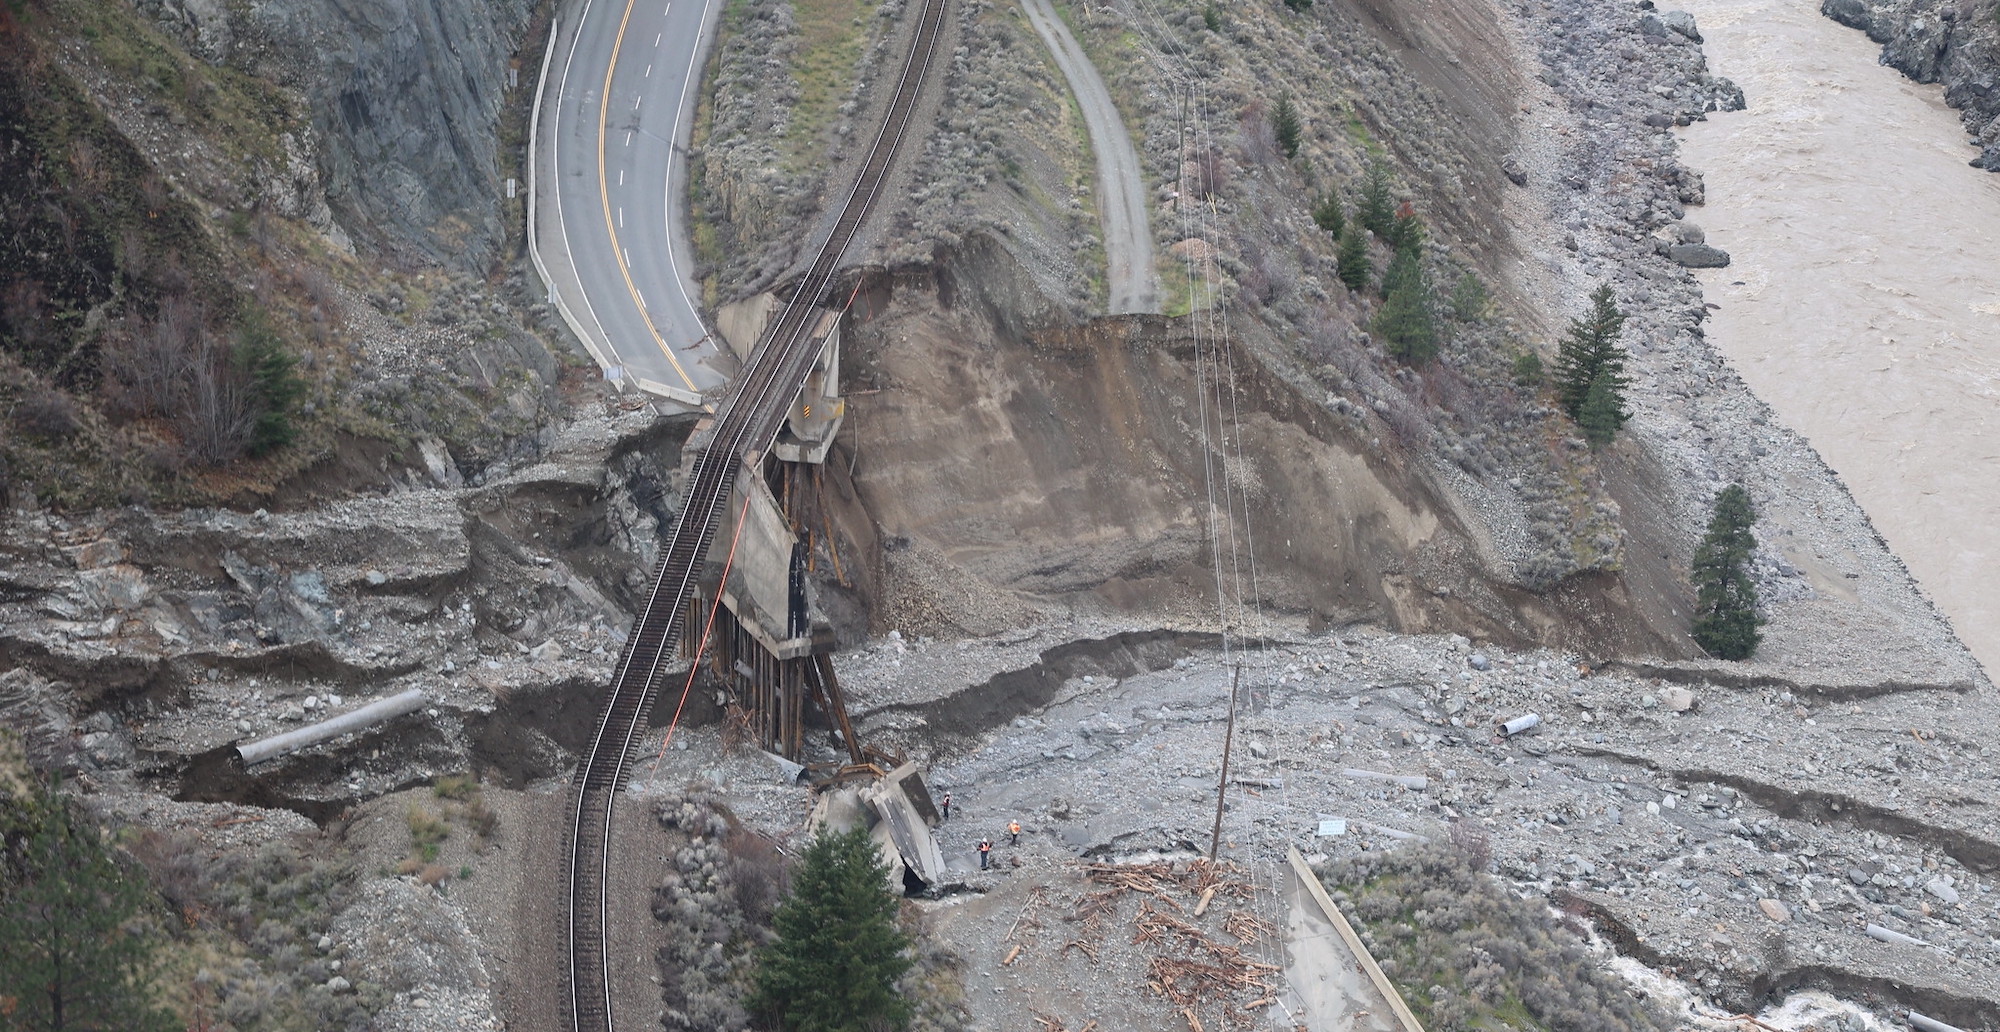 A photo of a highway and railway destroyed by a mudslide in British Columbia.